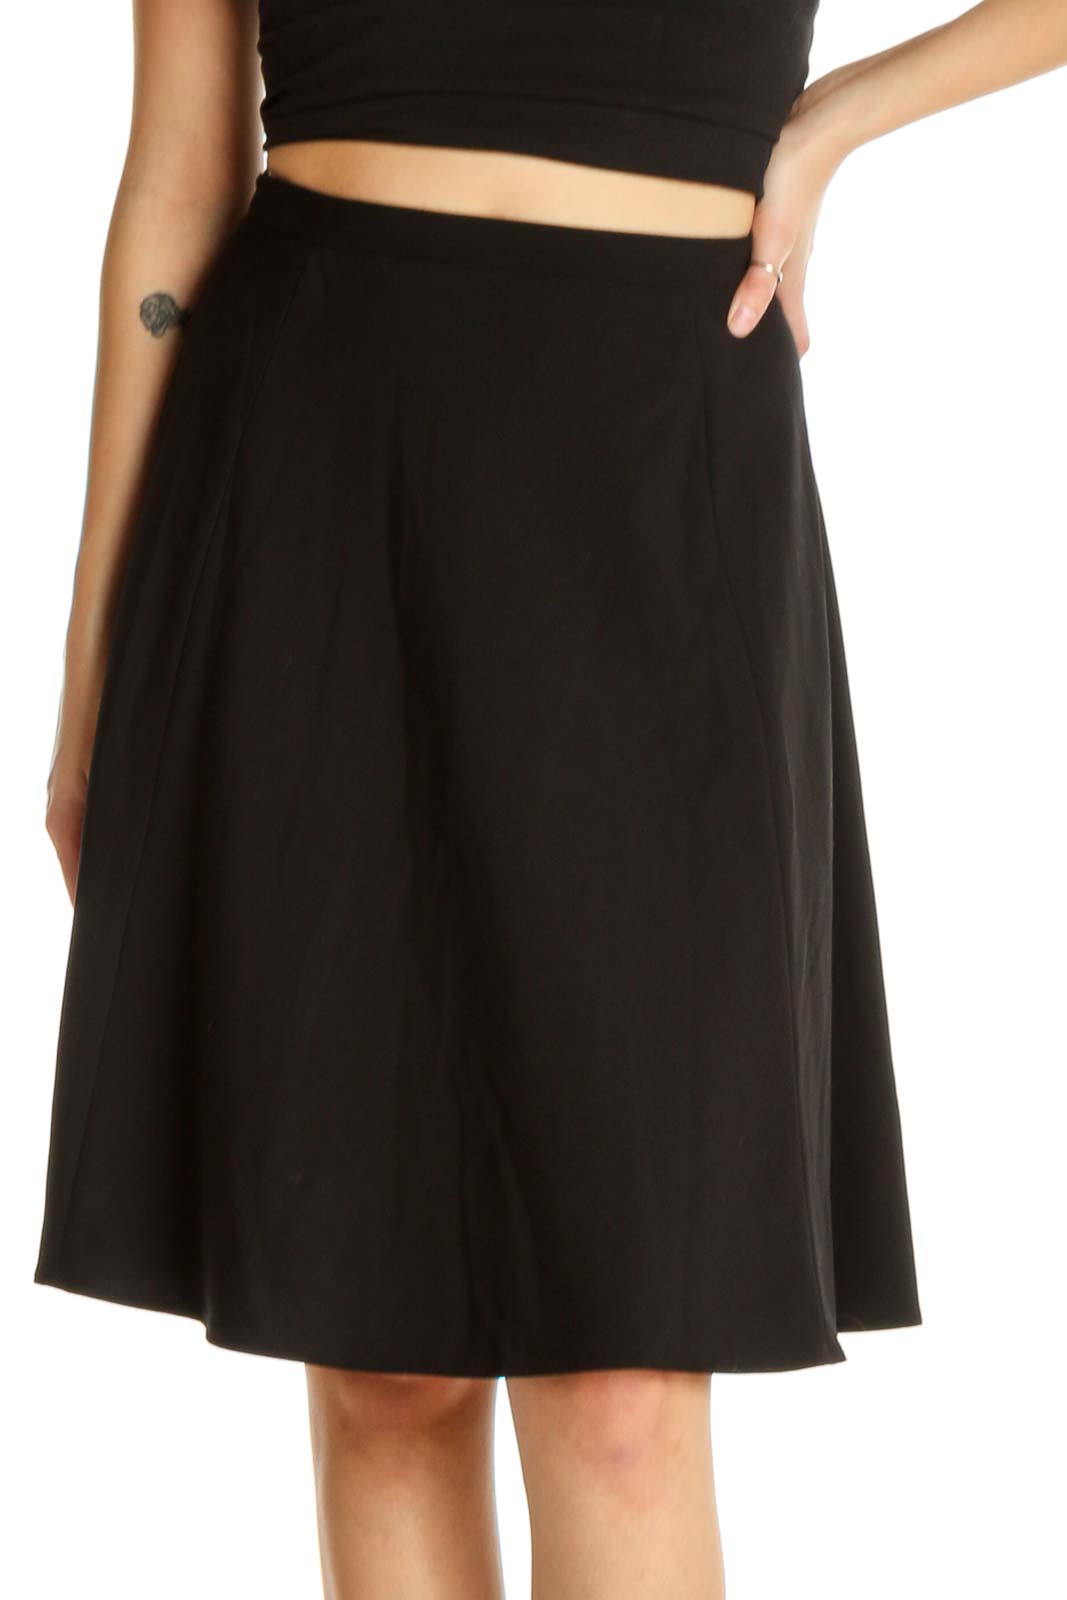 Black Classic A-Line Skirt Front